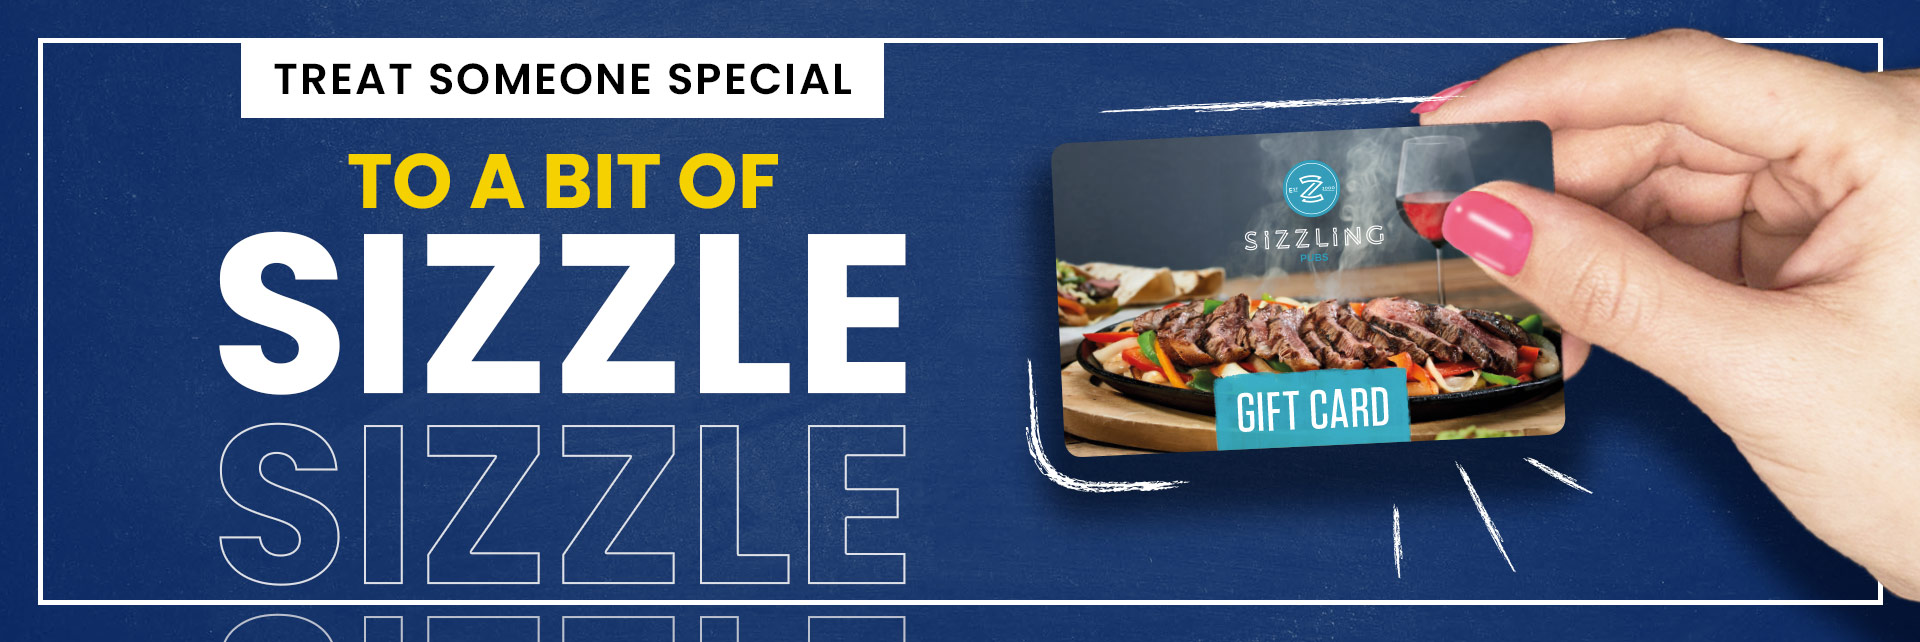 Sizzling Pubs Gift Card at The Bryncoch Inn in Neath